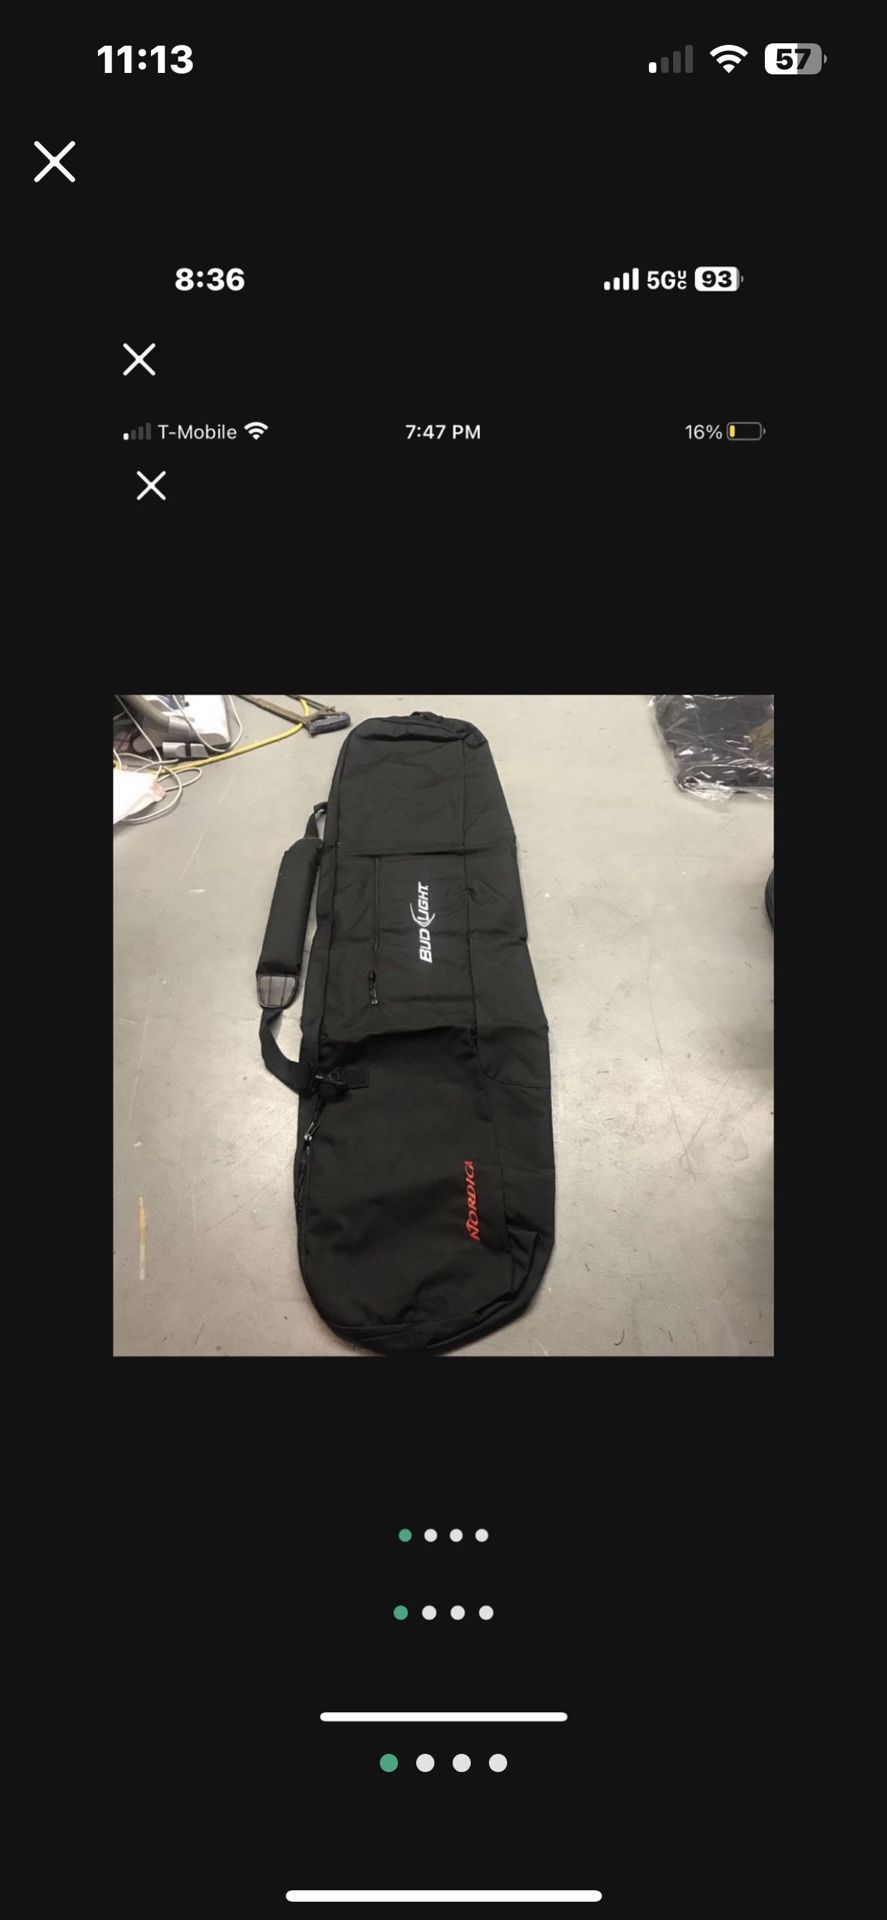 Nordica Snowboard Bag New In It’s Packageing 